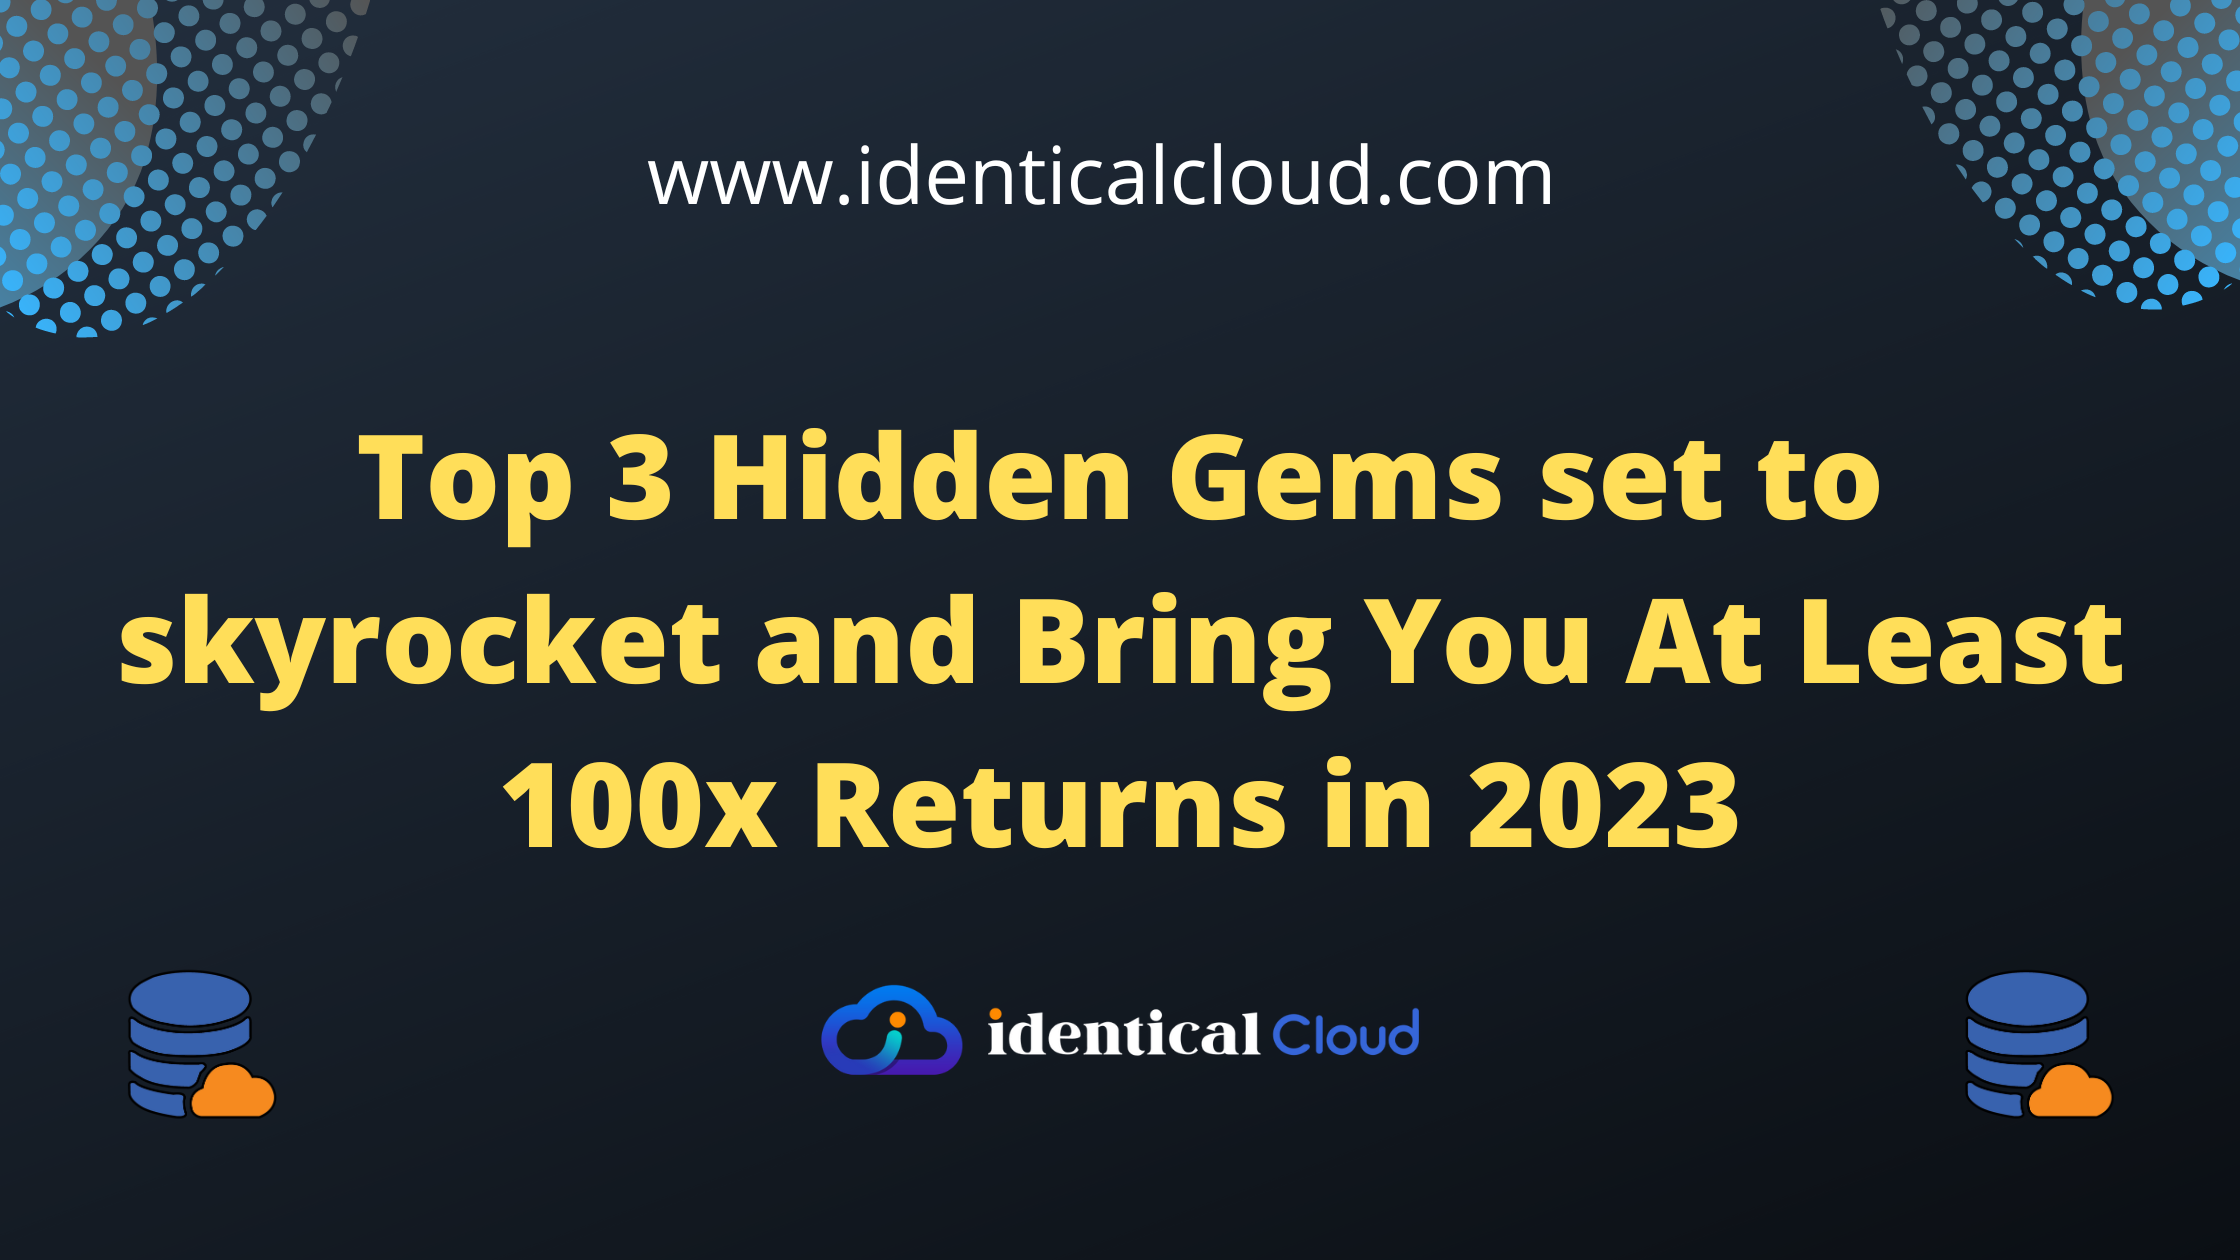 Top 3 Hidden Gems set to skyrocket and Bring You At Least 100x Returns in 2023 - identicalcloud.com